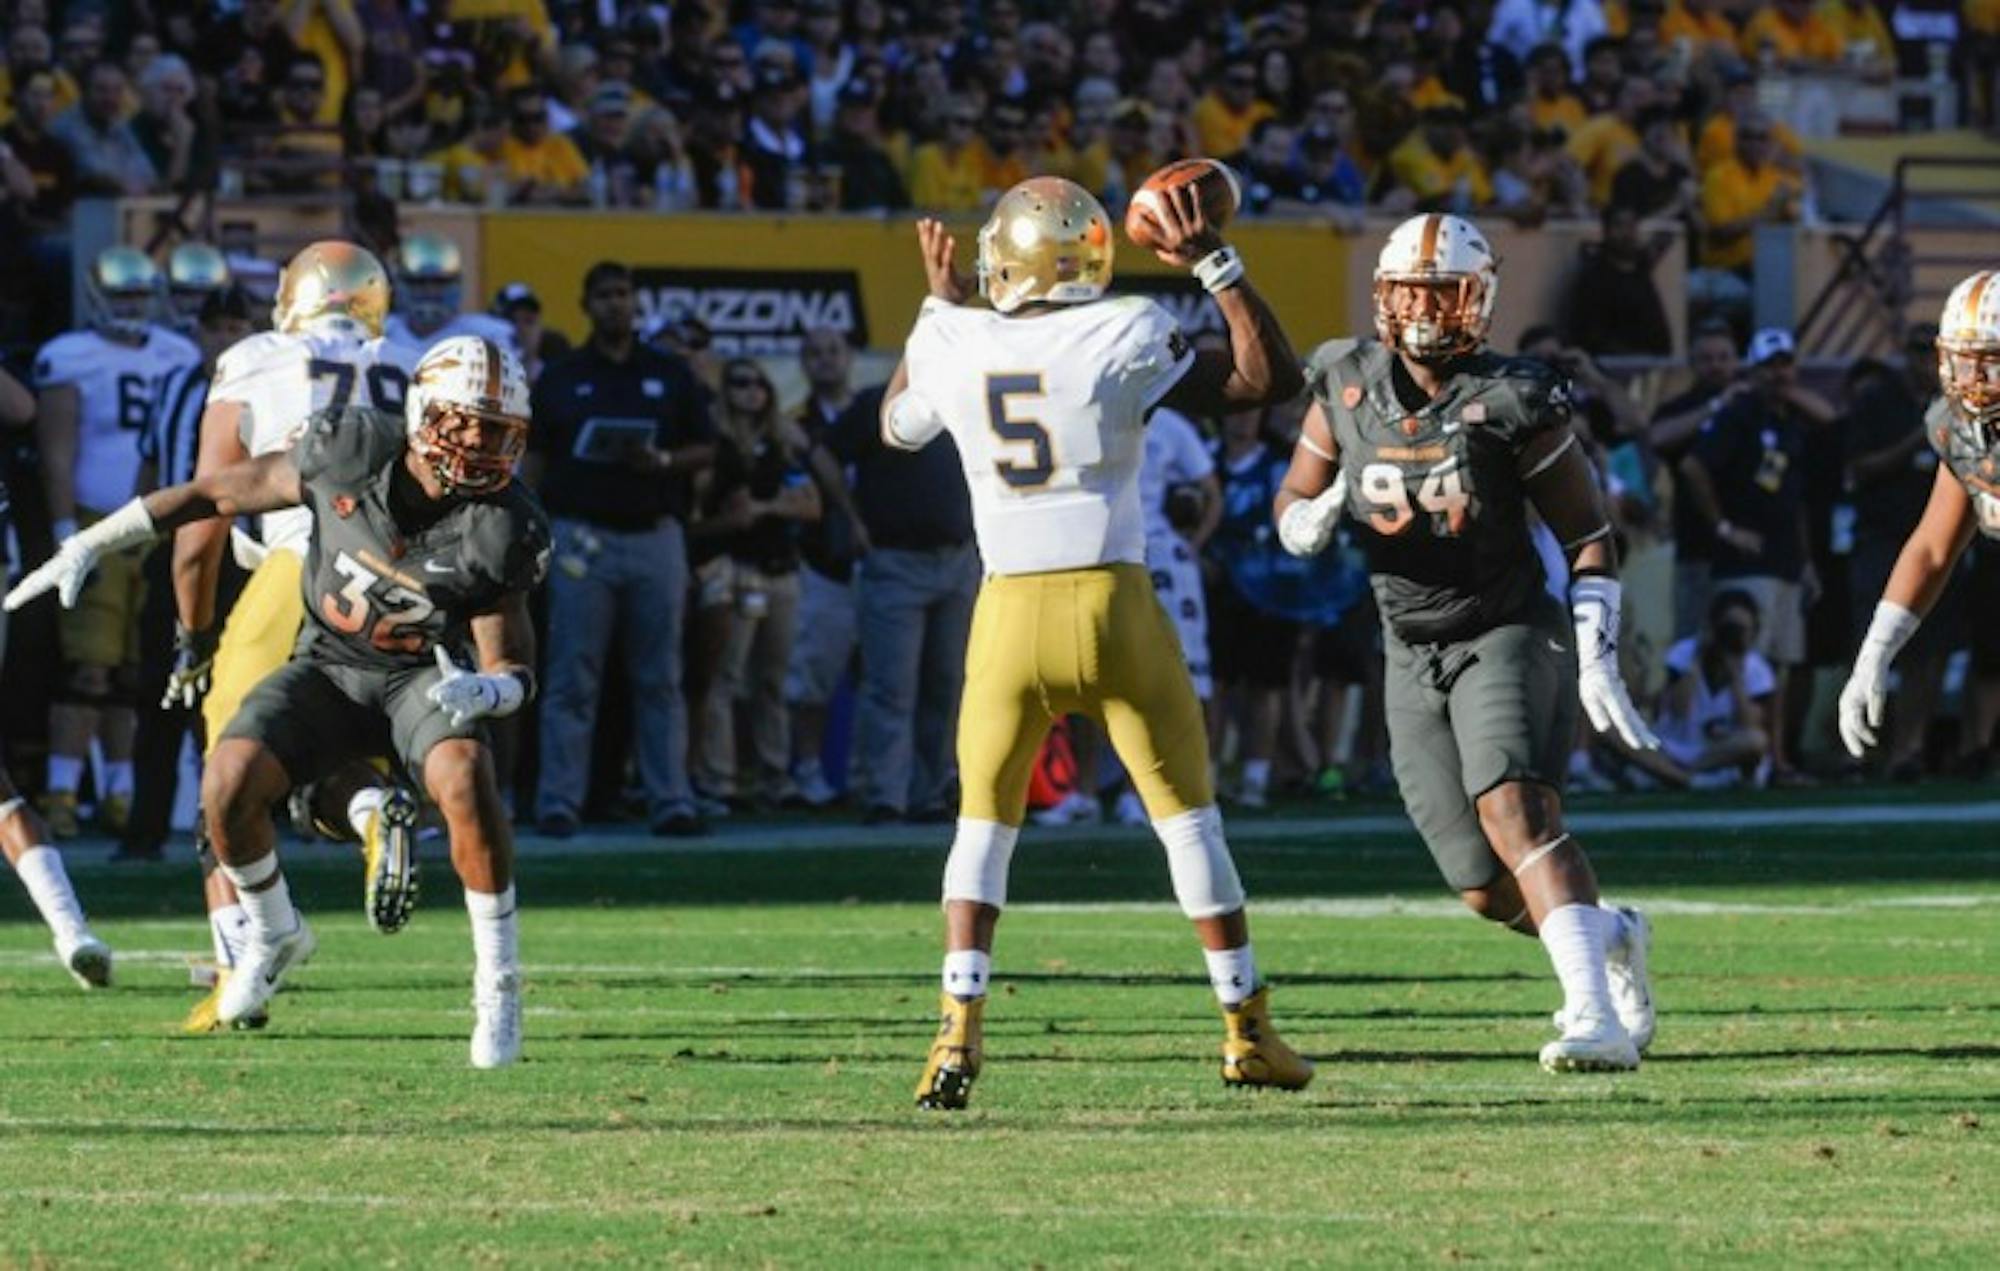 Senior quarterback Everett Golson drops back to pass during Notre Dame’s 55-31 loss Saturday at Arizona State. Golson has turned the ball over 17 times in the last six games, including five times Saturday.